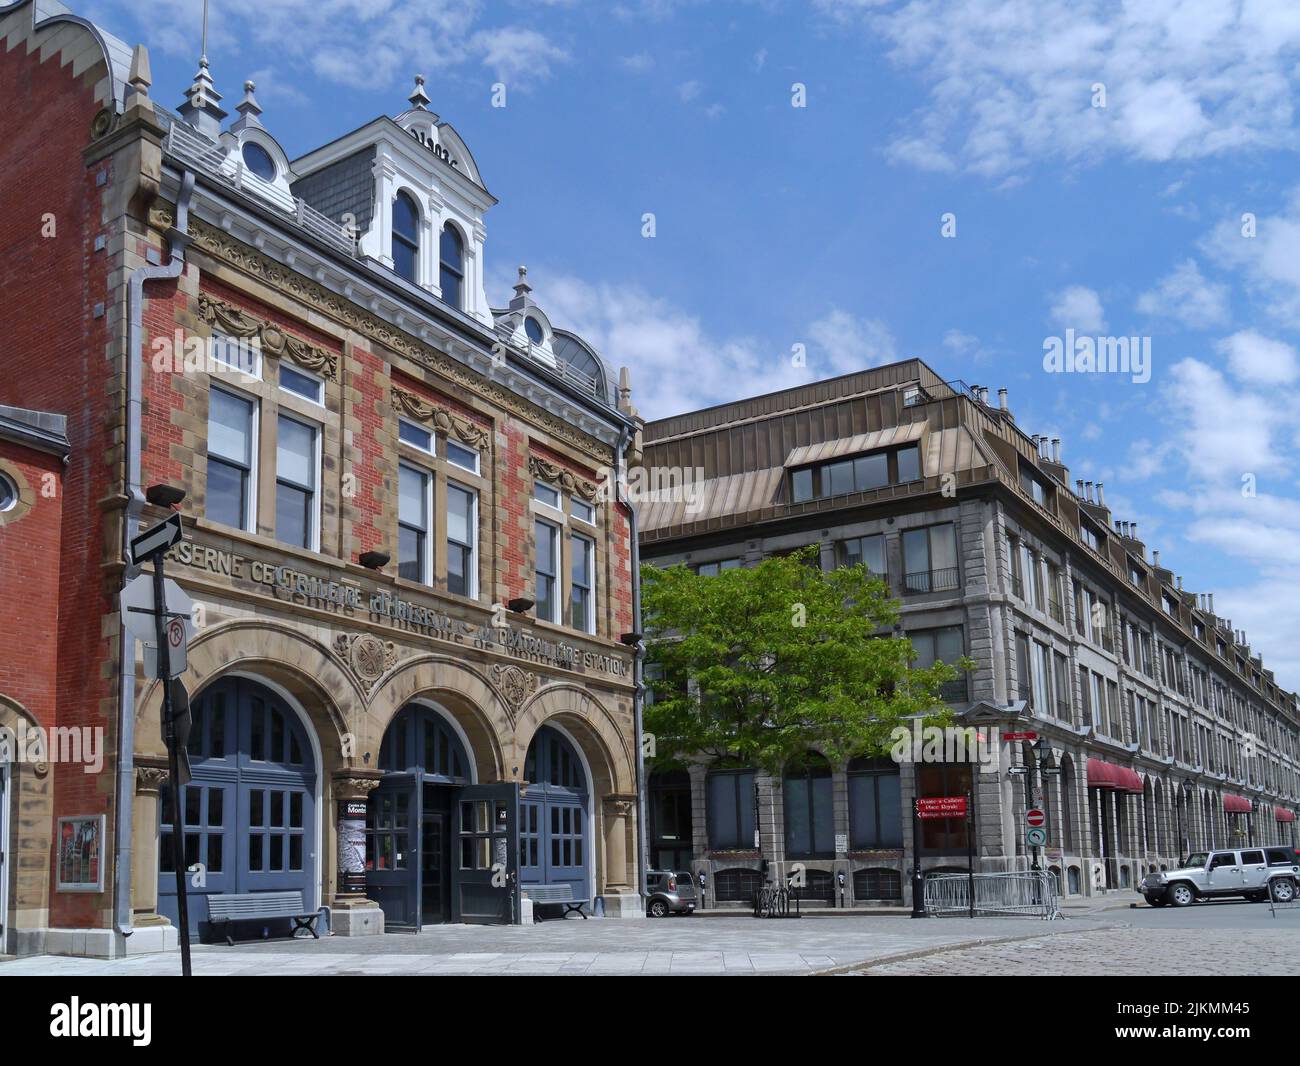 Preserved old architecture in downtown Montreal, with former fire station now a historical museum Stock Photo